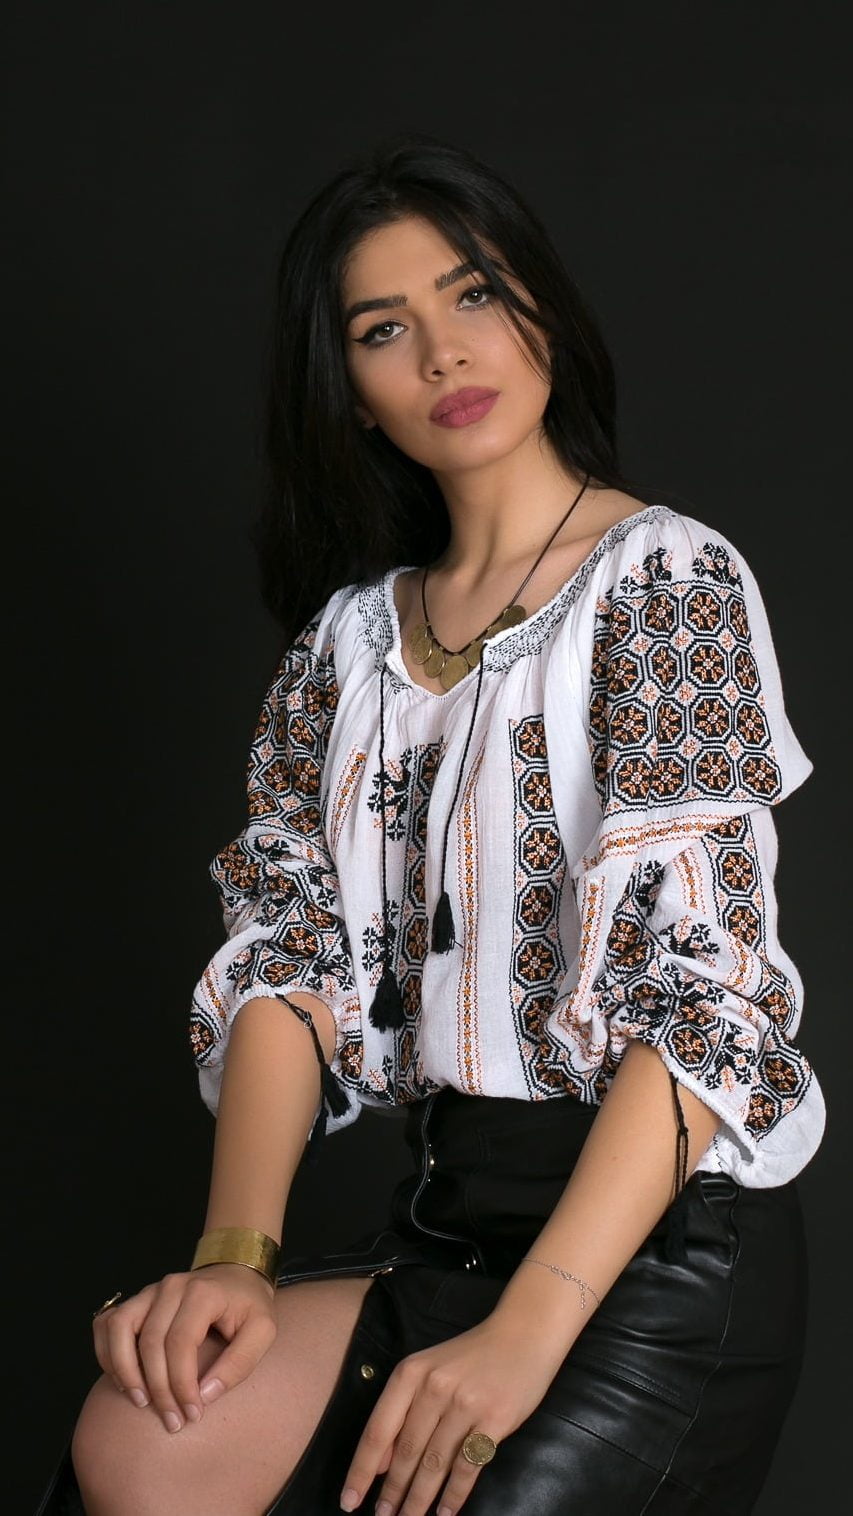 Step Into A World Of Tradition With 'Roa', A Handmade Romanian Blouse Adorned With Cotton And Silk Embroidery. Symbolic Wheel Motifs And A Cascade Of Hand-Stitched Stars Make This Piece A Celebration Of Life'S Cyclical Nature, Enhancing Your Aura With Beauty And Positivity